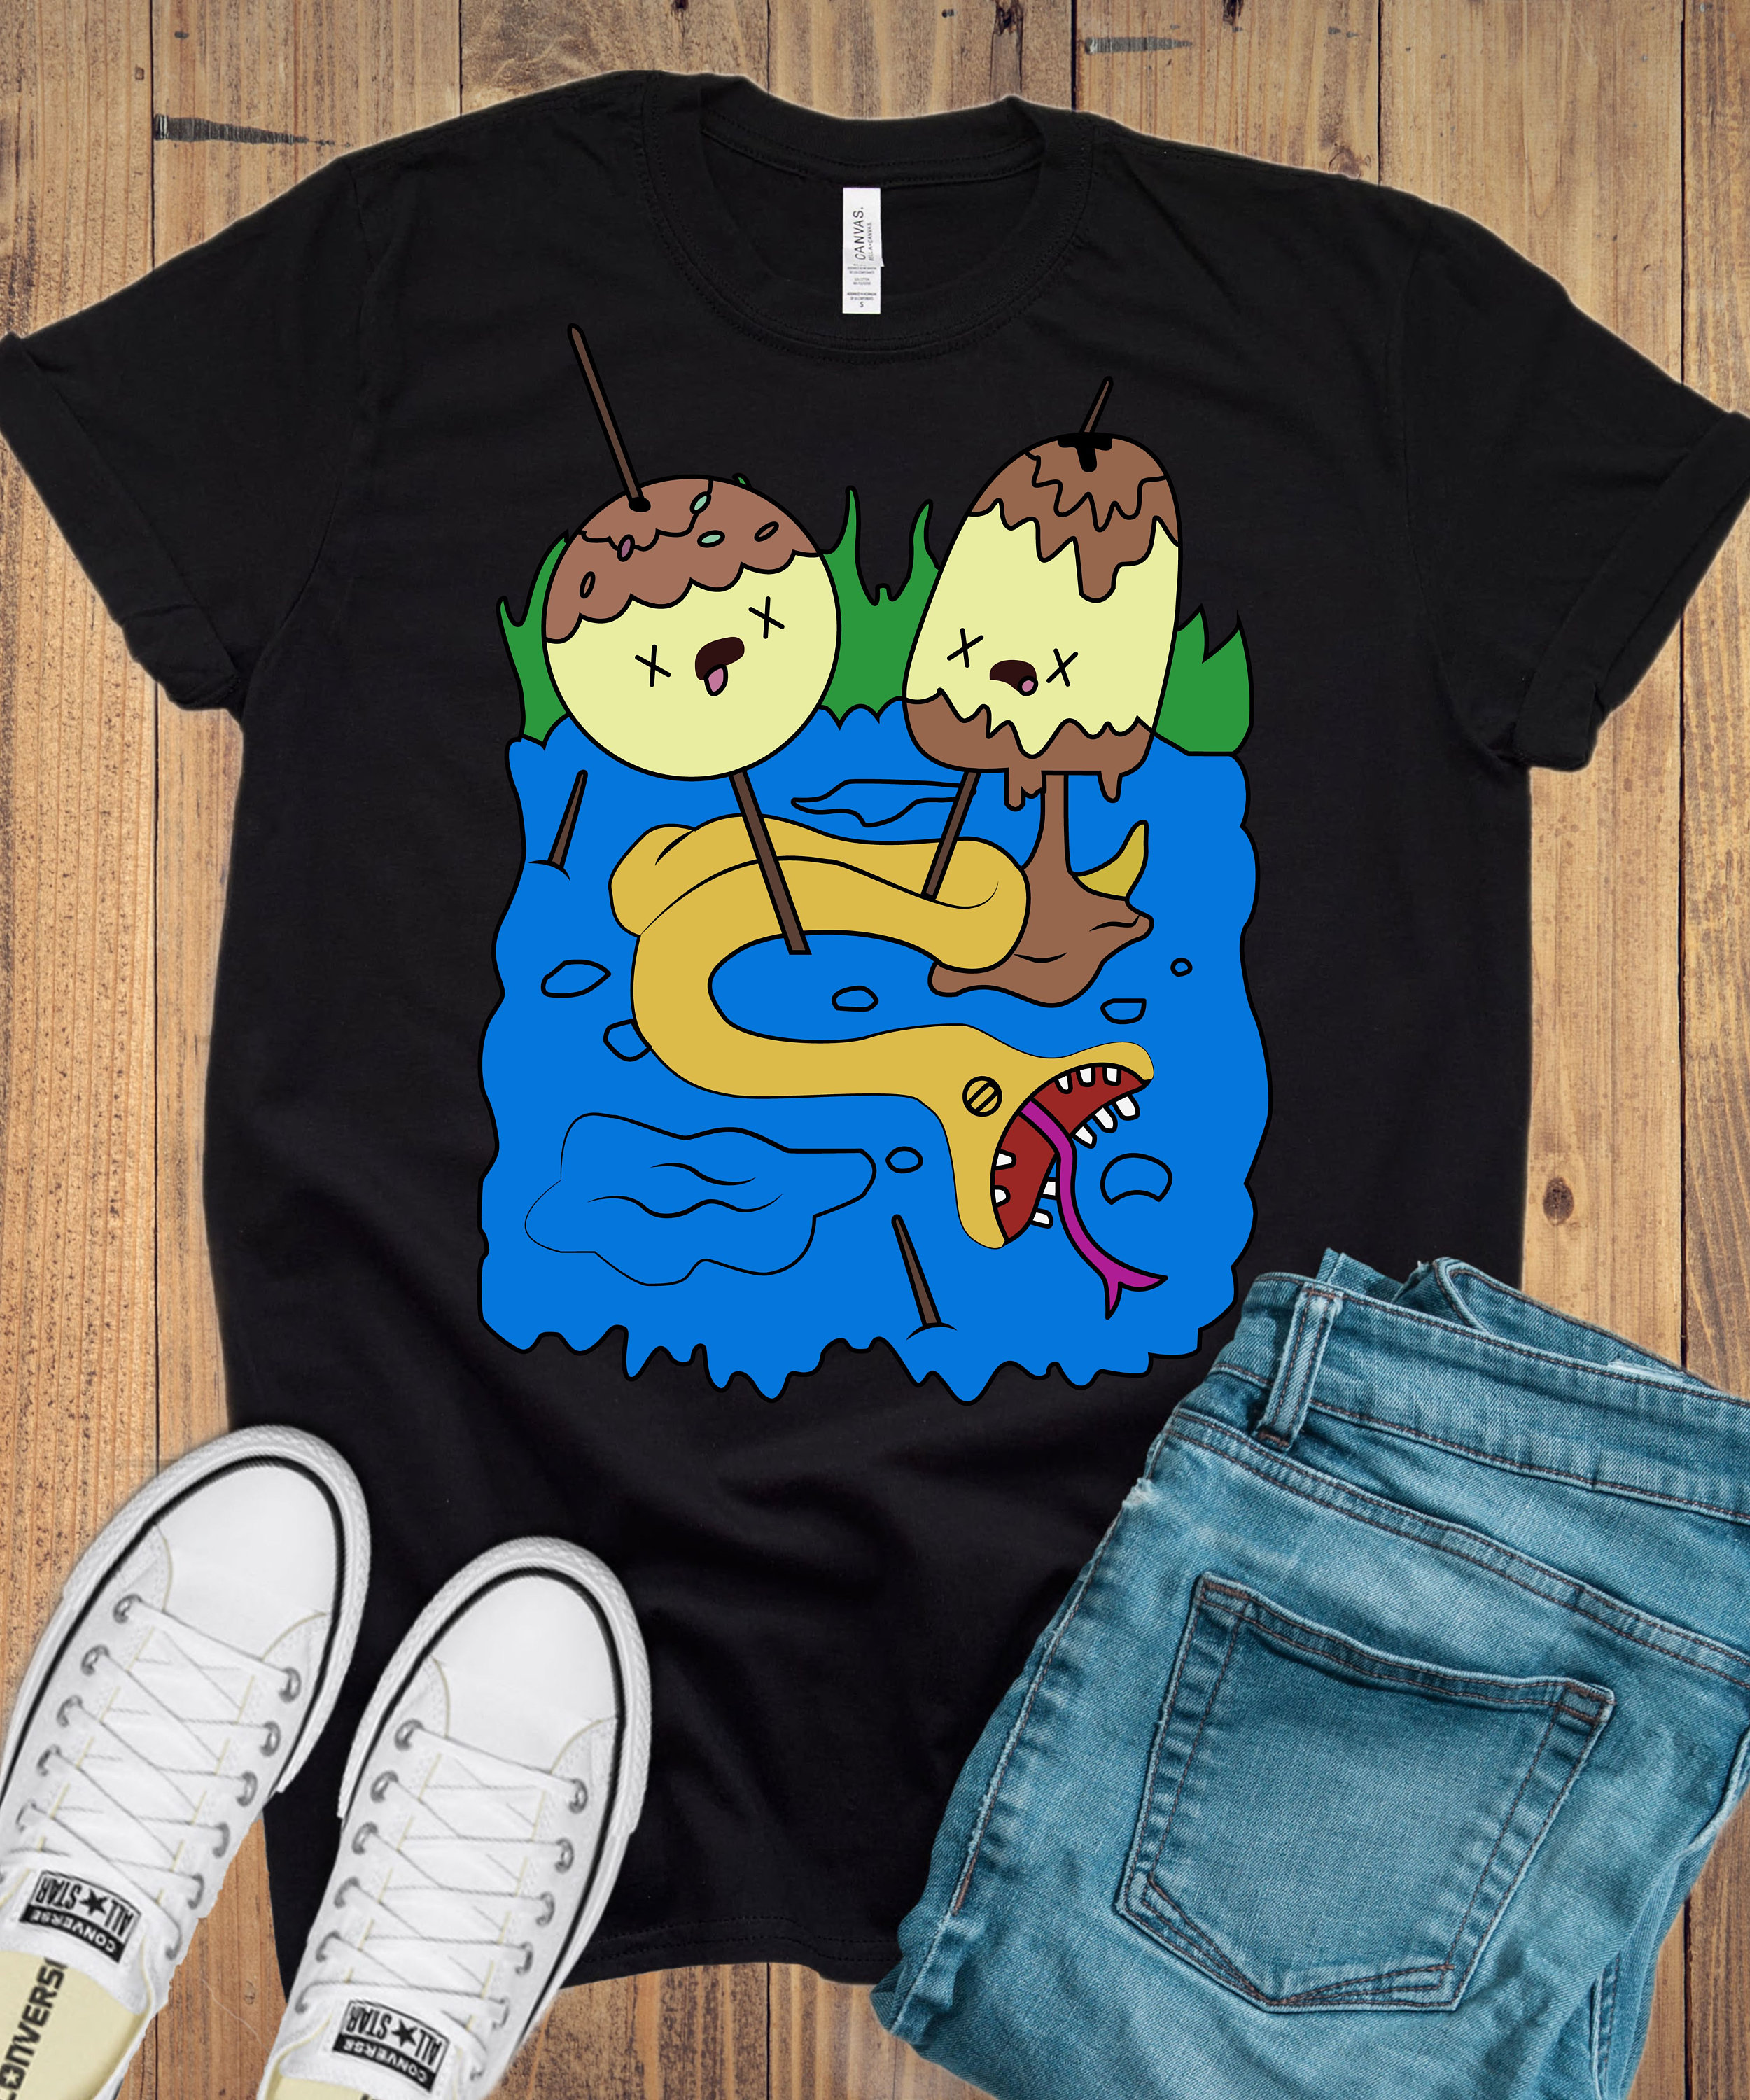 Style in Adventure Time Apparel from Black Milk Clothing